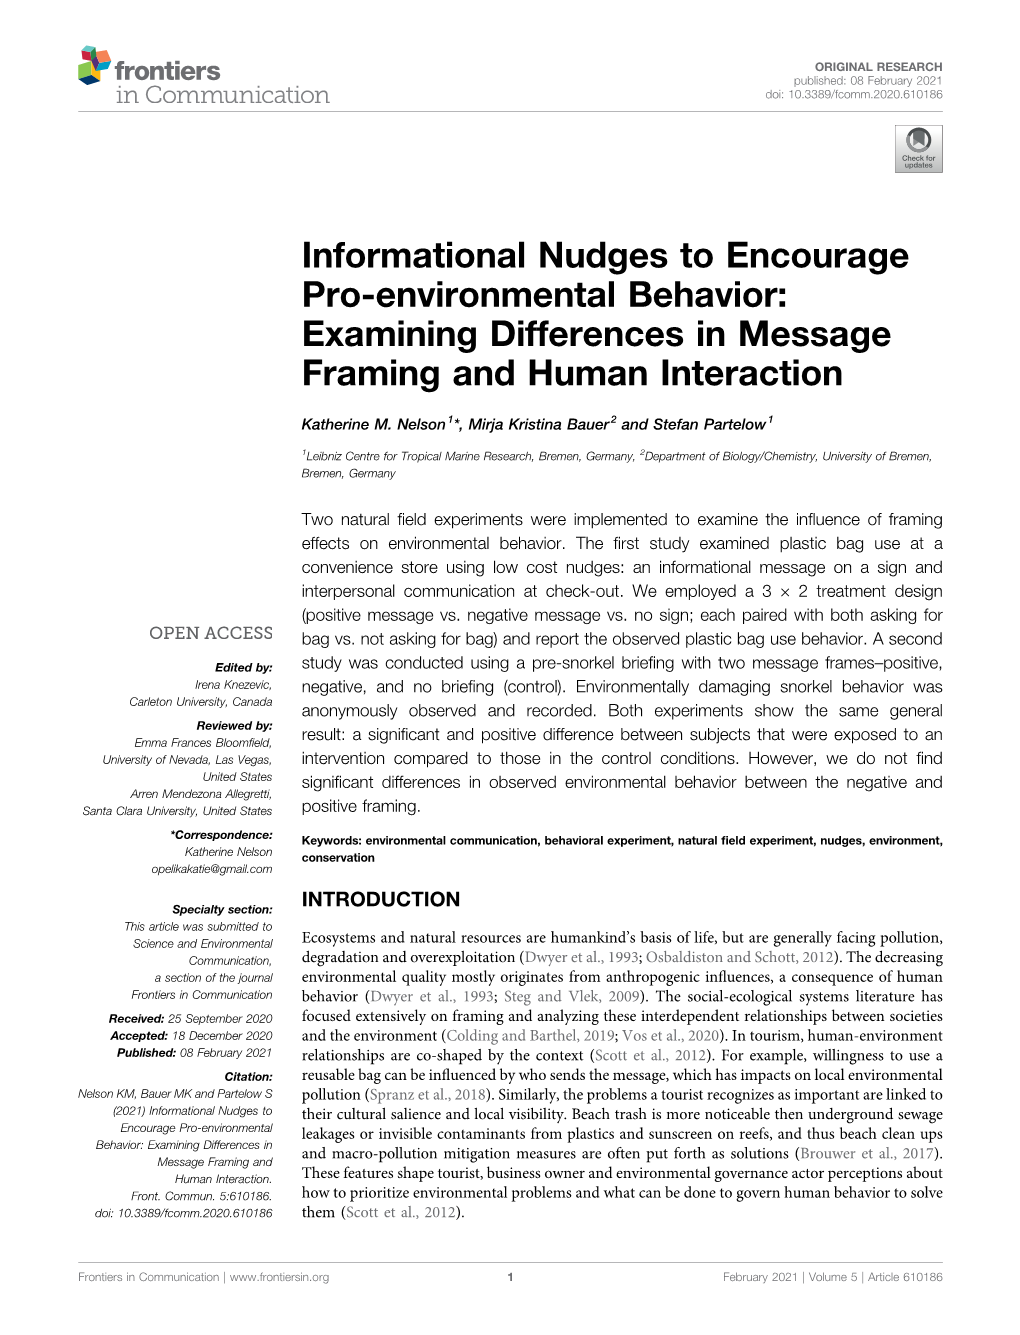 Informational Nudges to Encourage Pro-Environmental Behavior: Examining Differences in Message Framing and Human Interaction